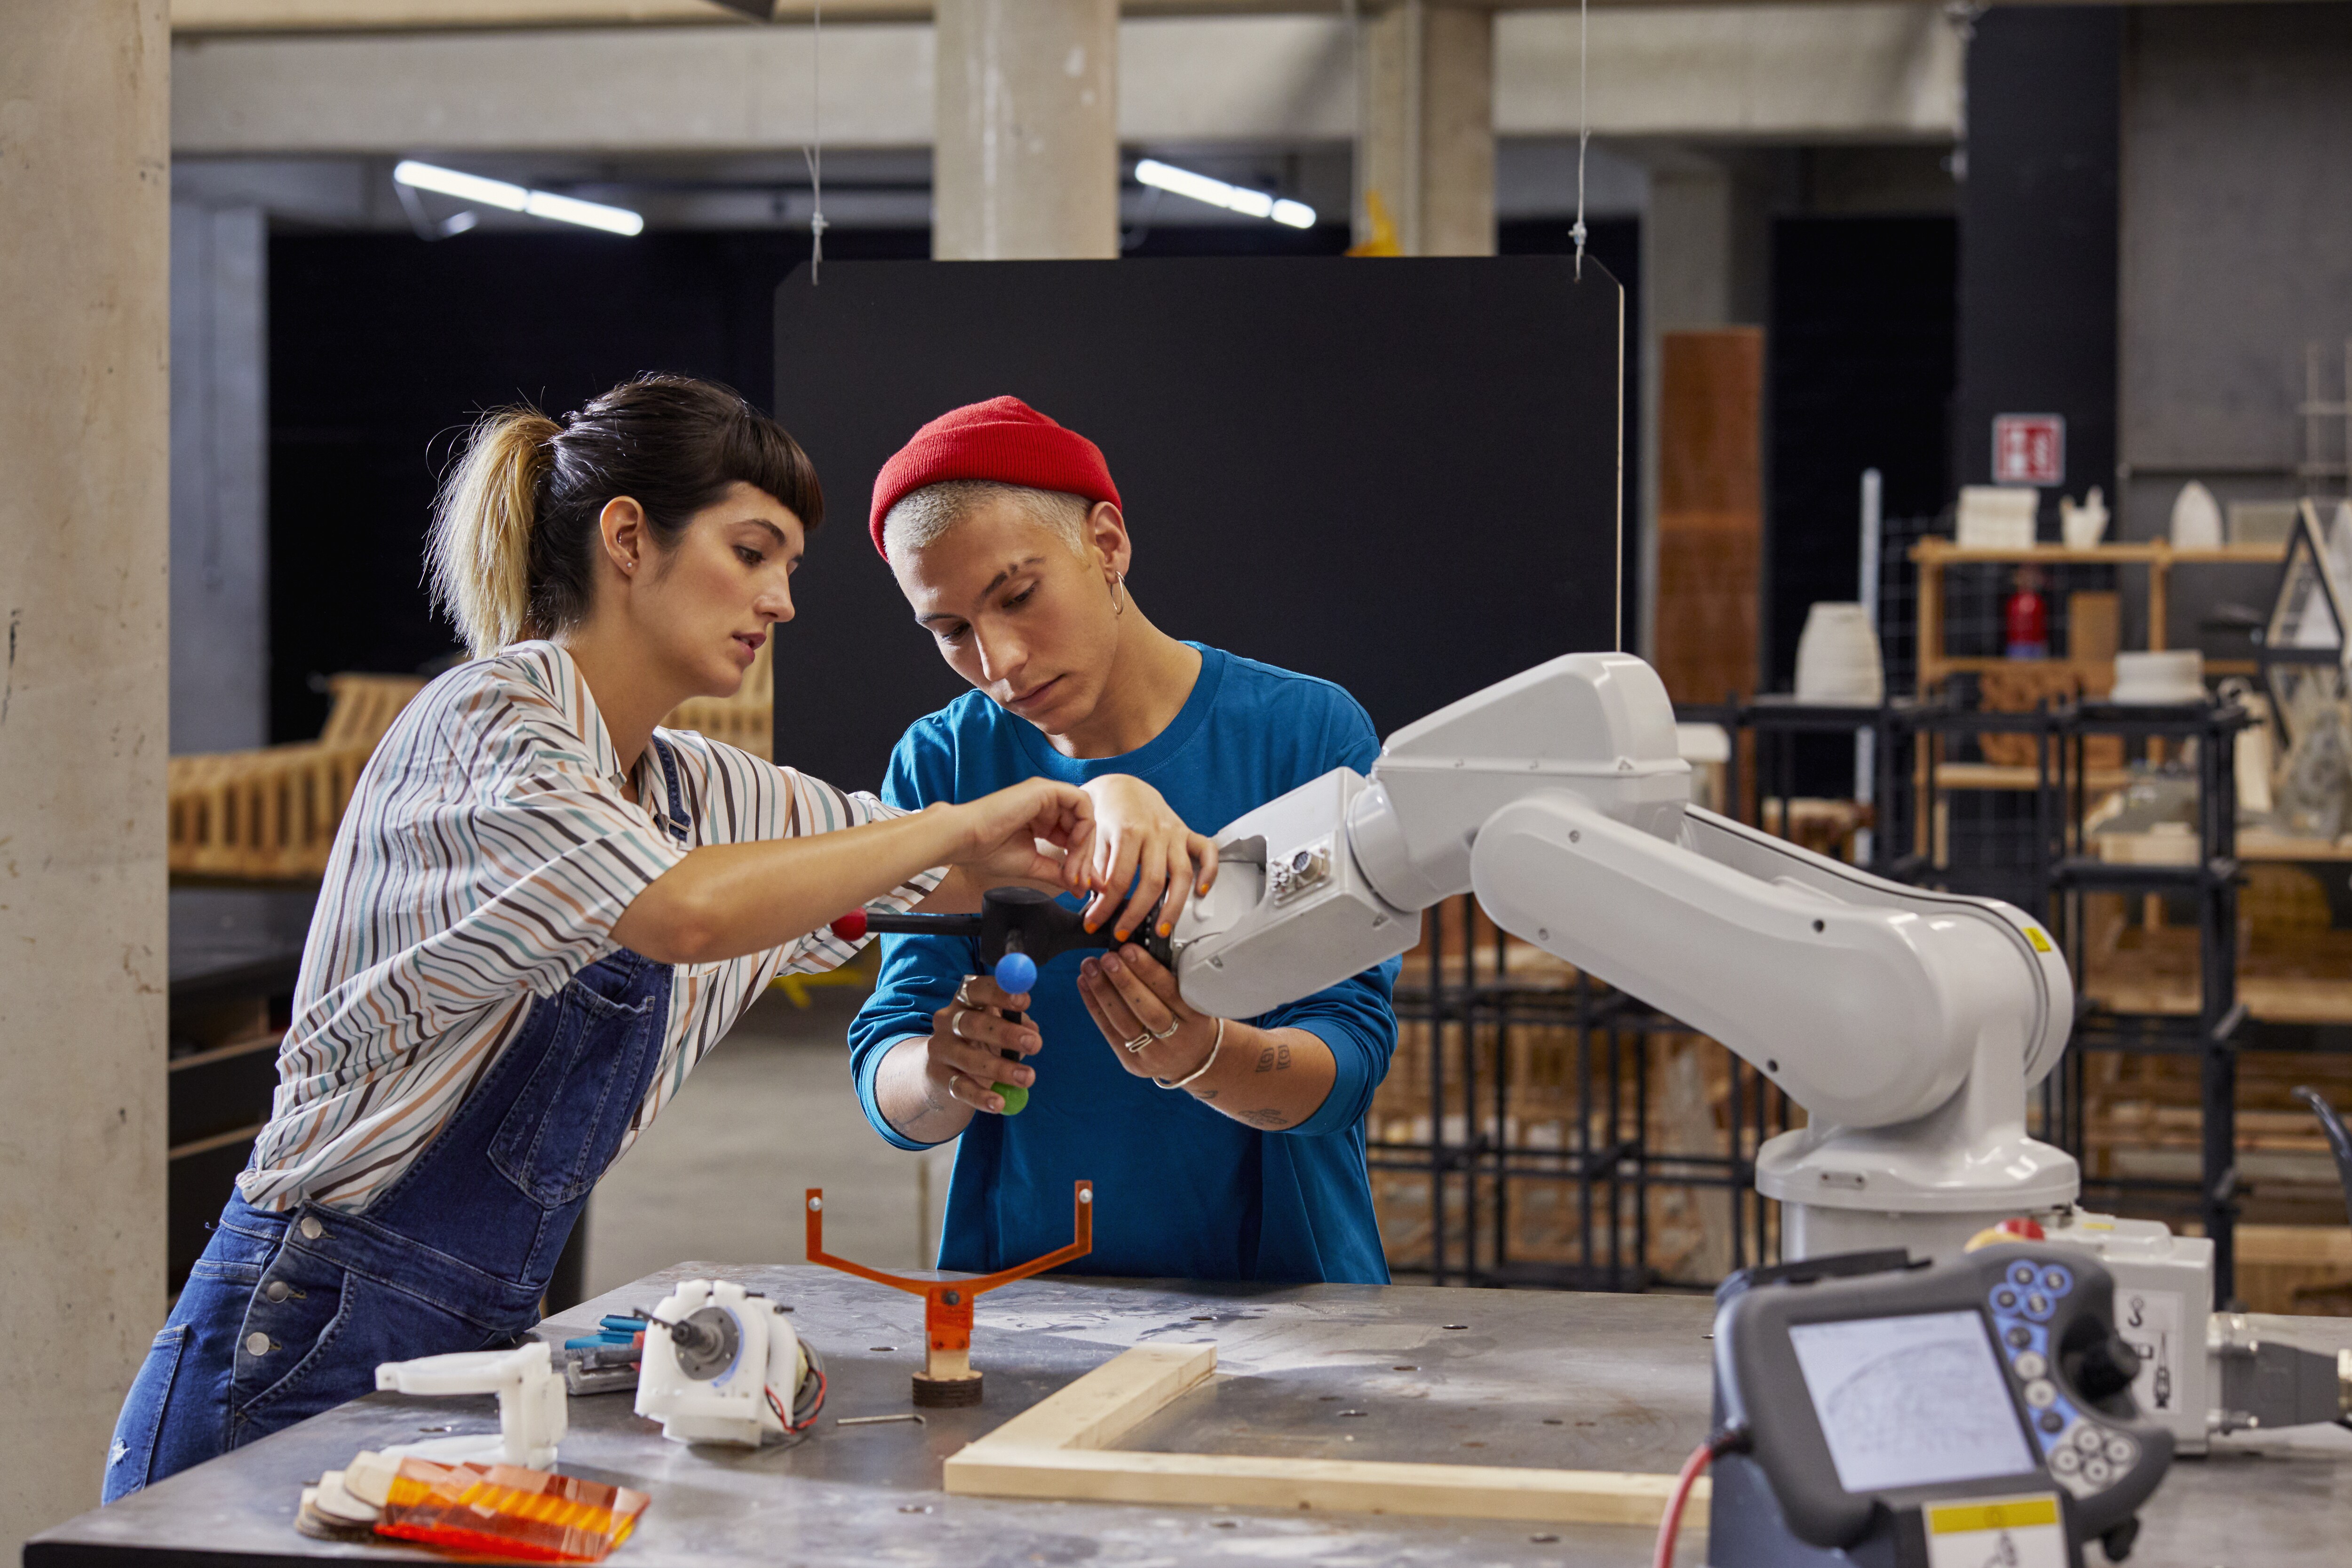 Photograph of two students working with a robotic arm